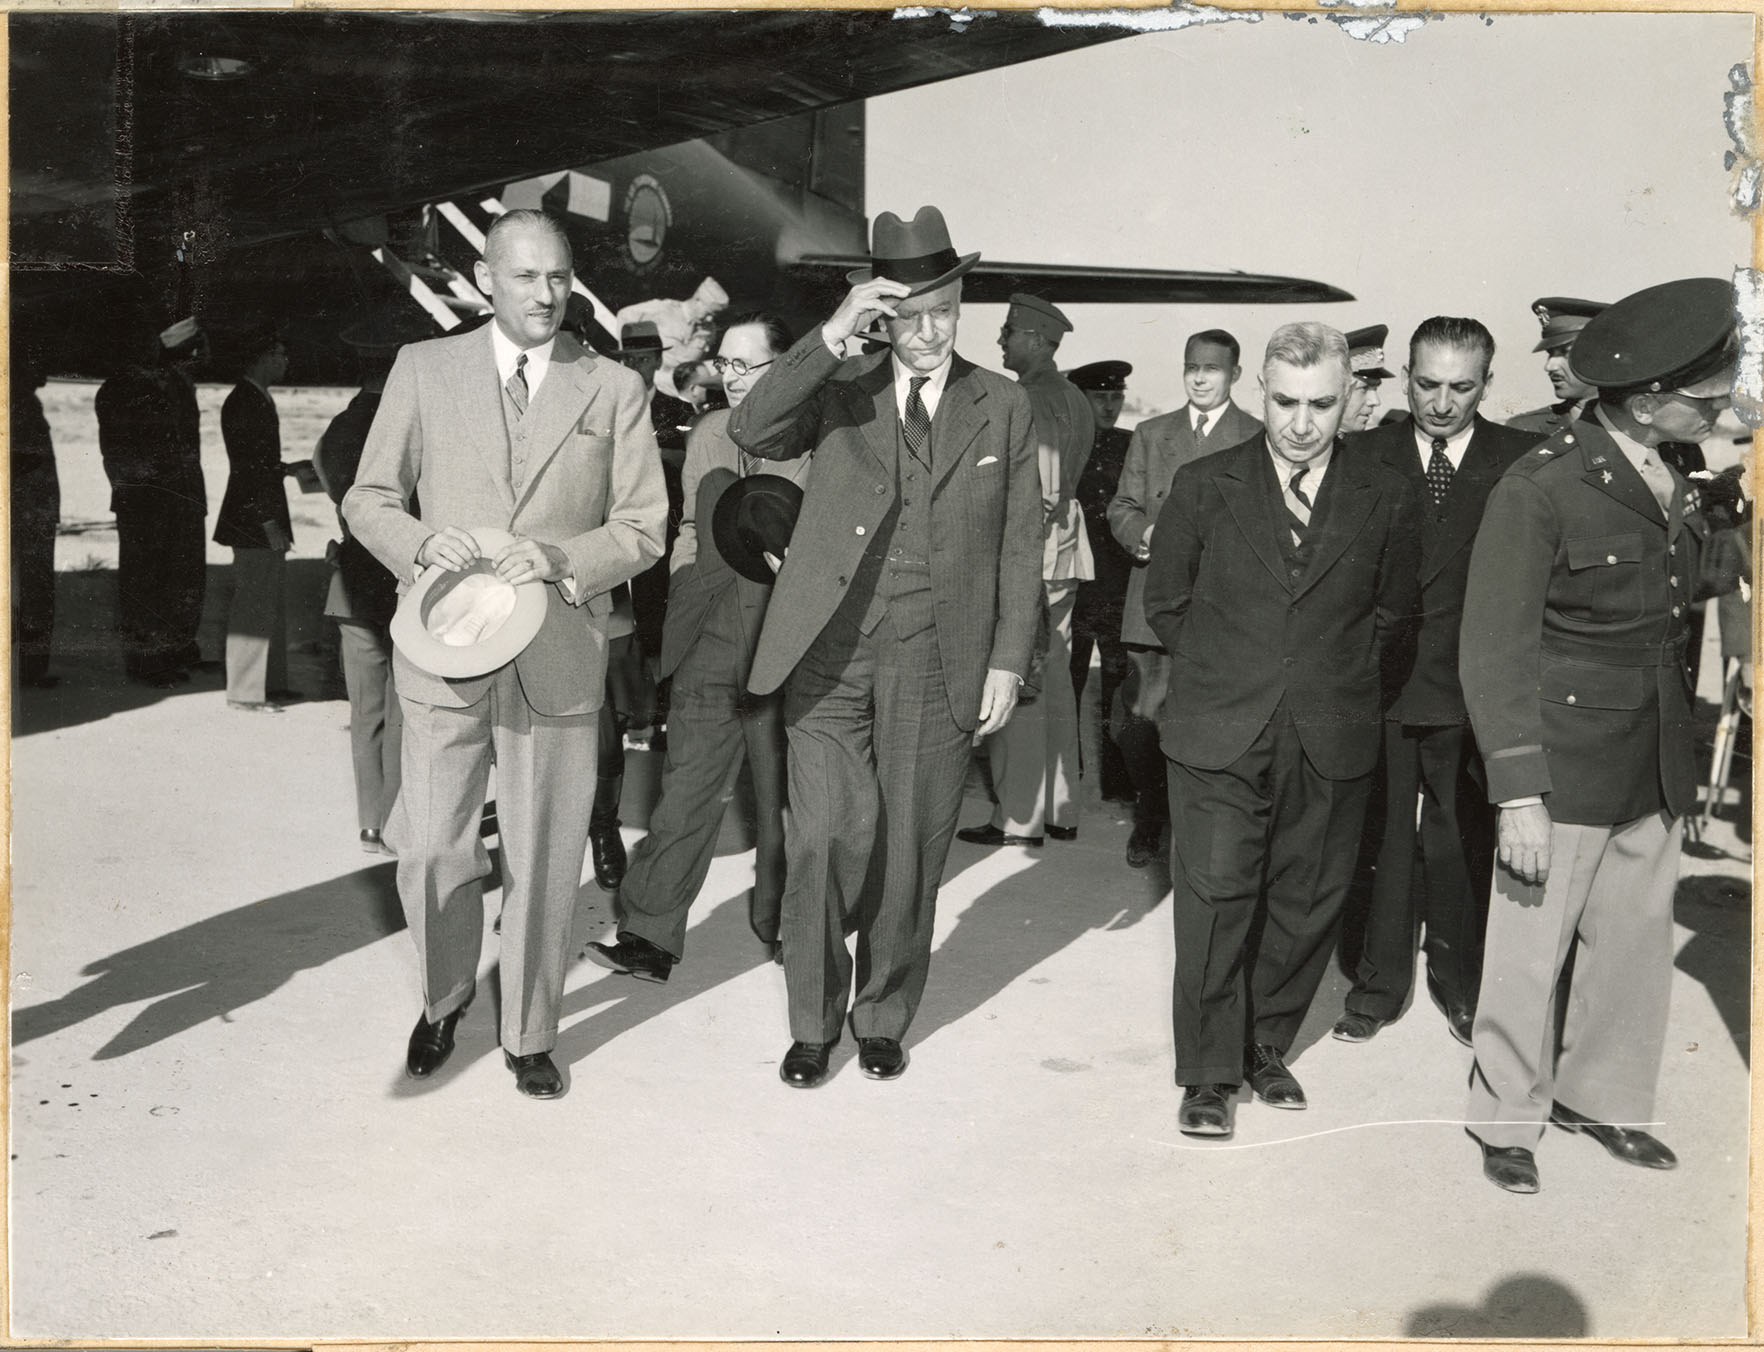 A group of civilian men walk away after exiting an airplane